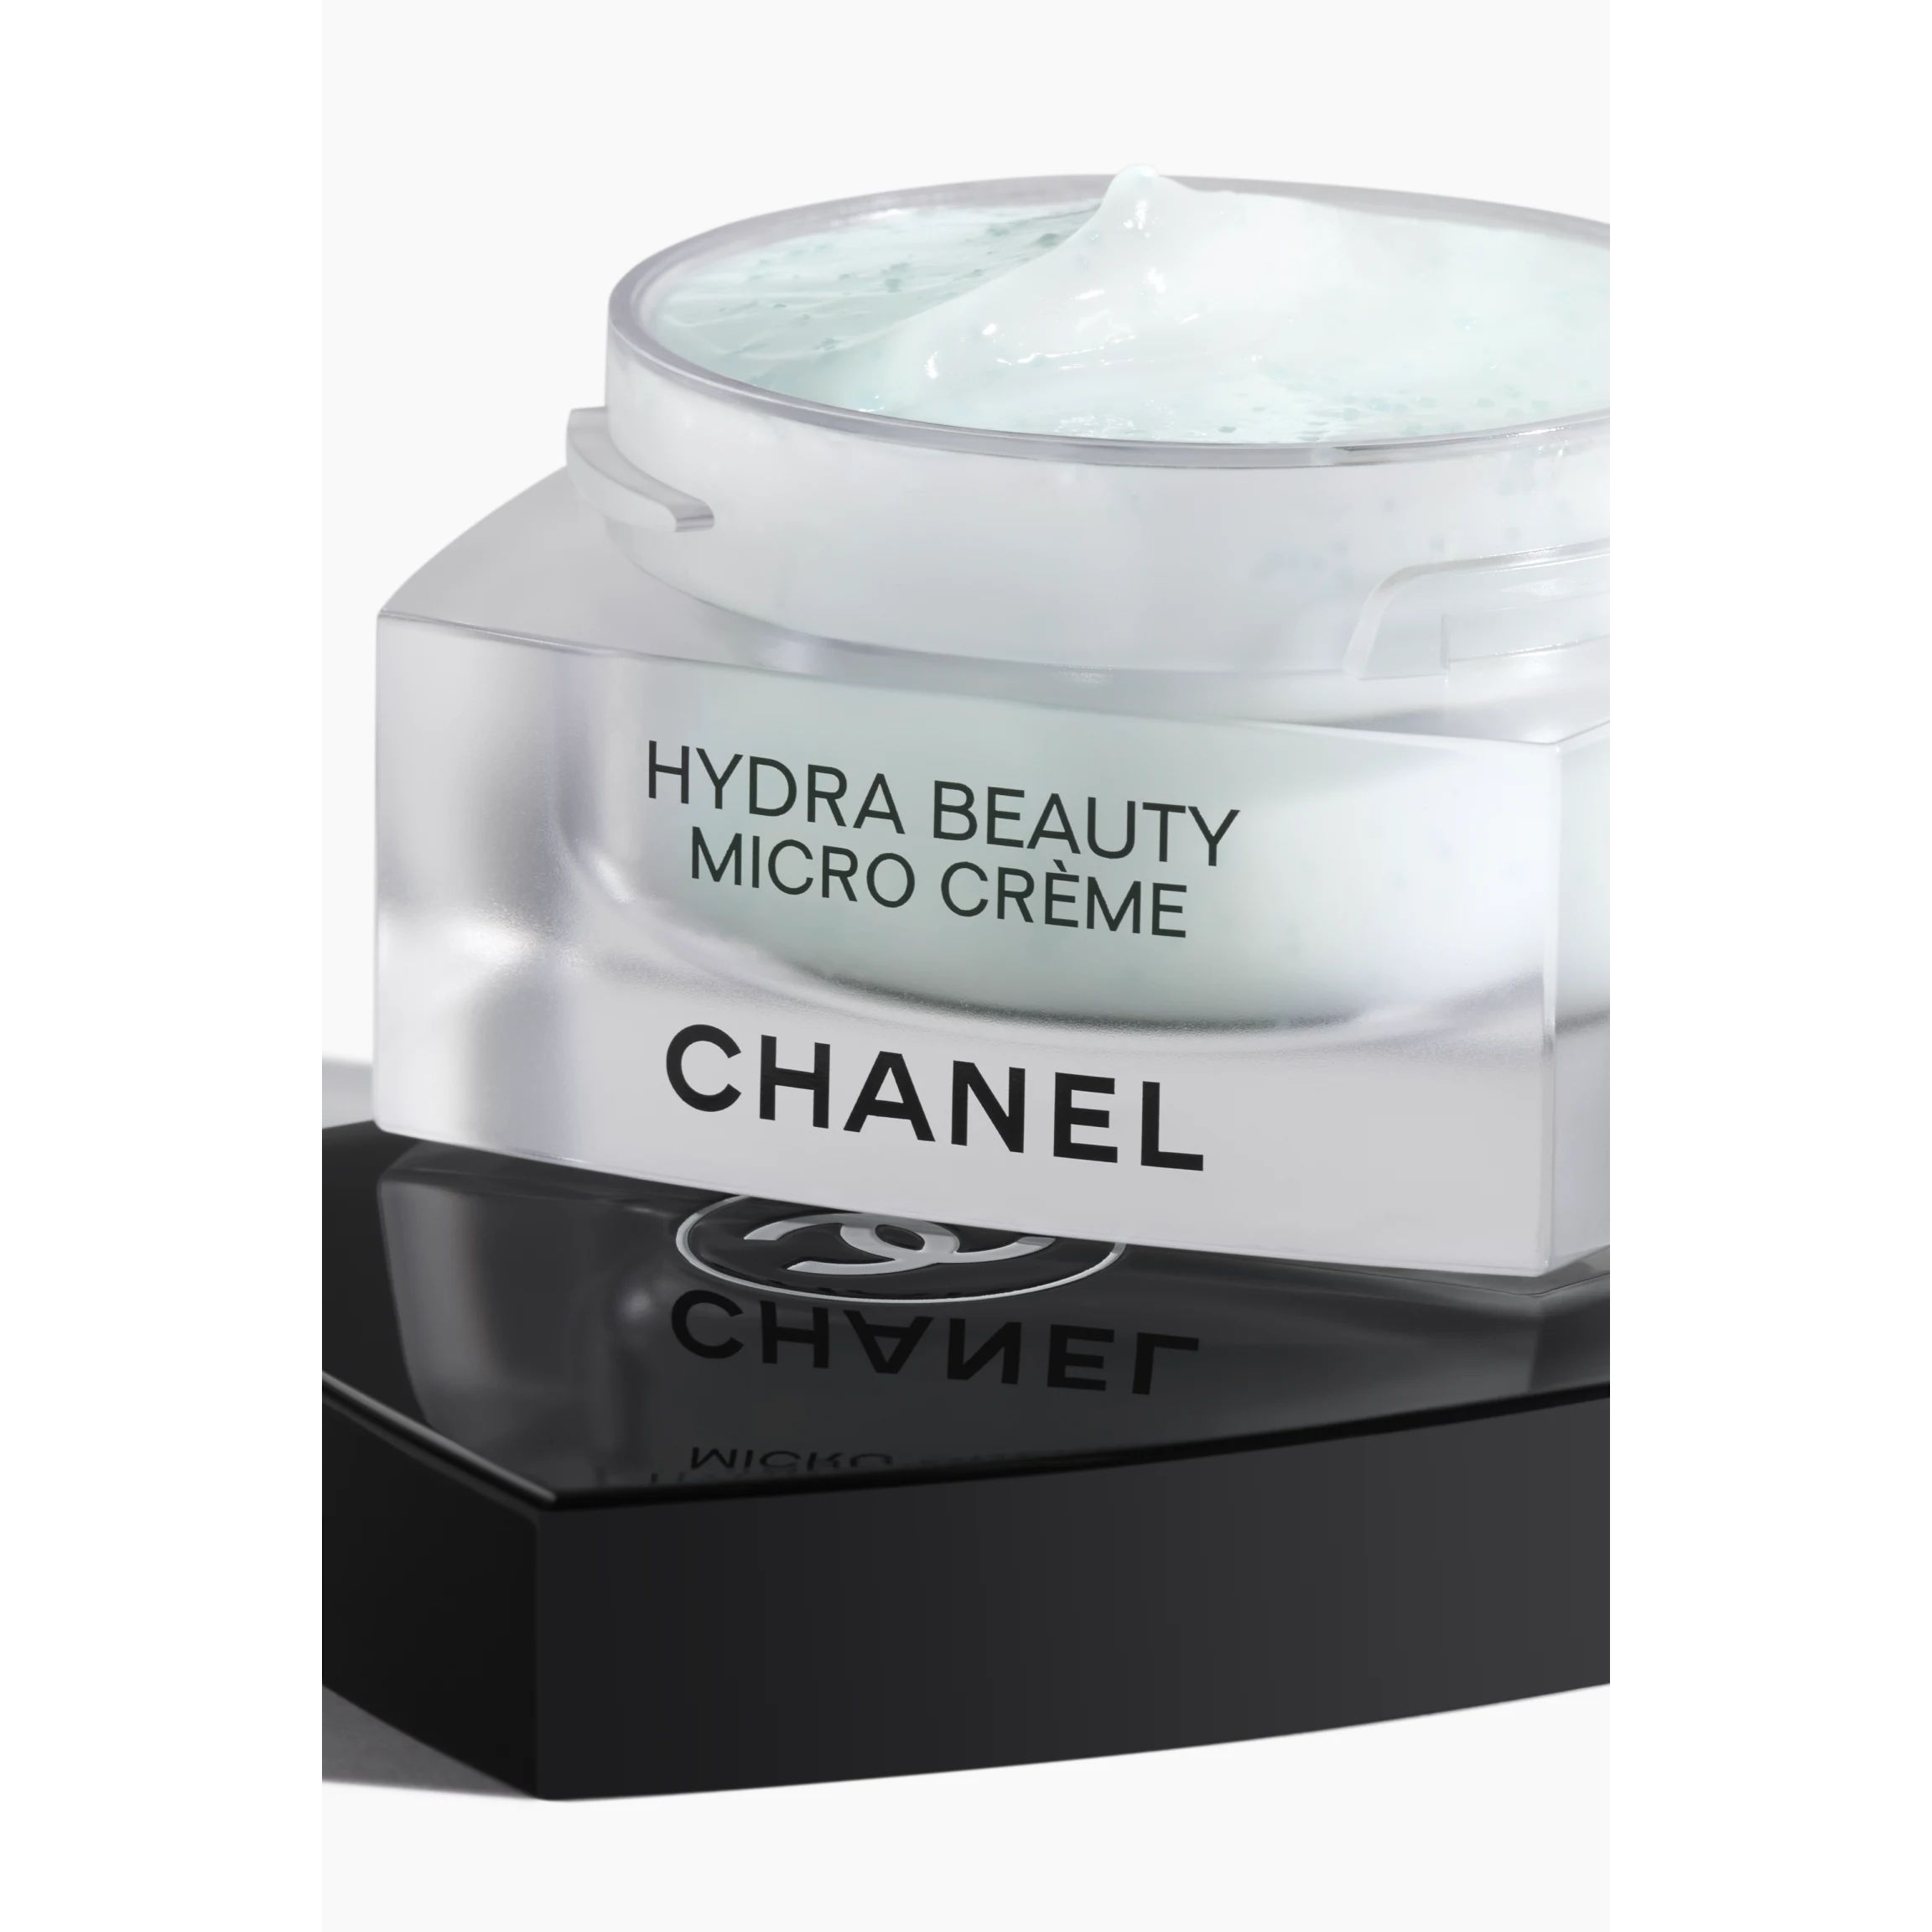 HYDRA BEAUTY MICRO CRÈME Fortifying Replenishing Hydration | CHANEL | Chanel, Inc. (US)